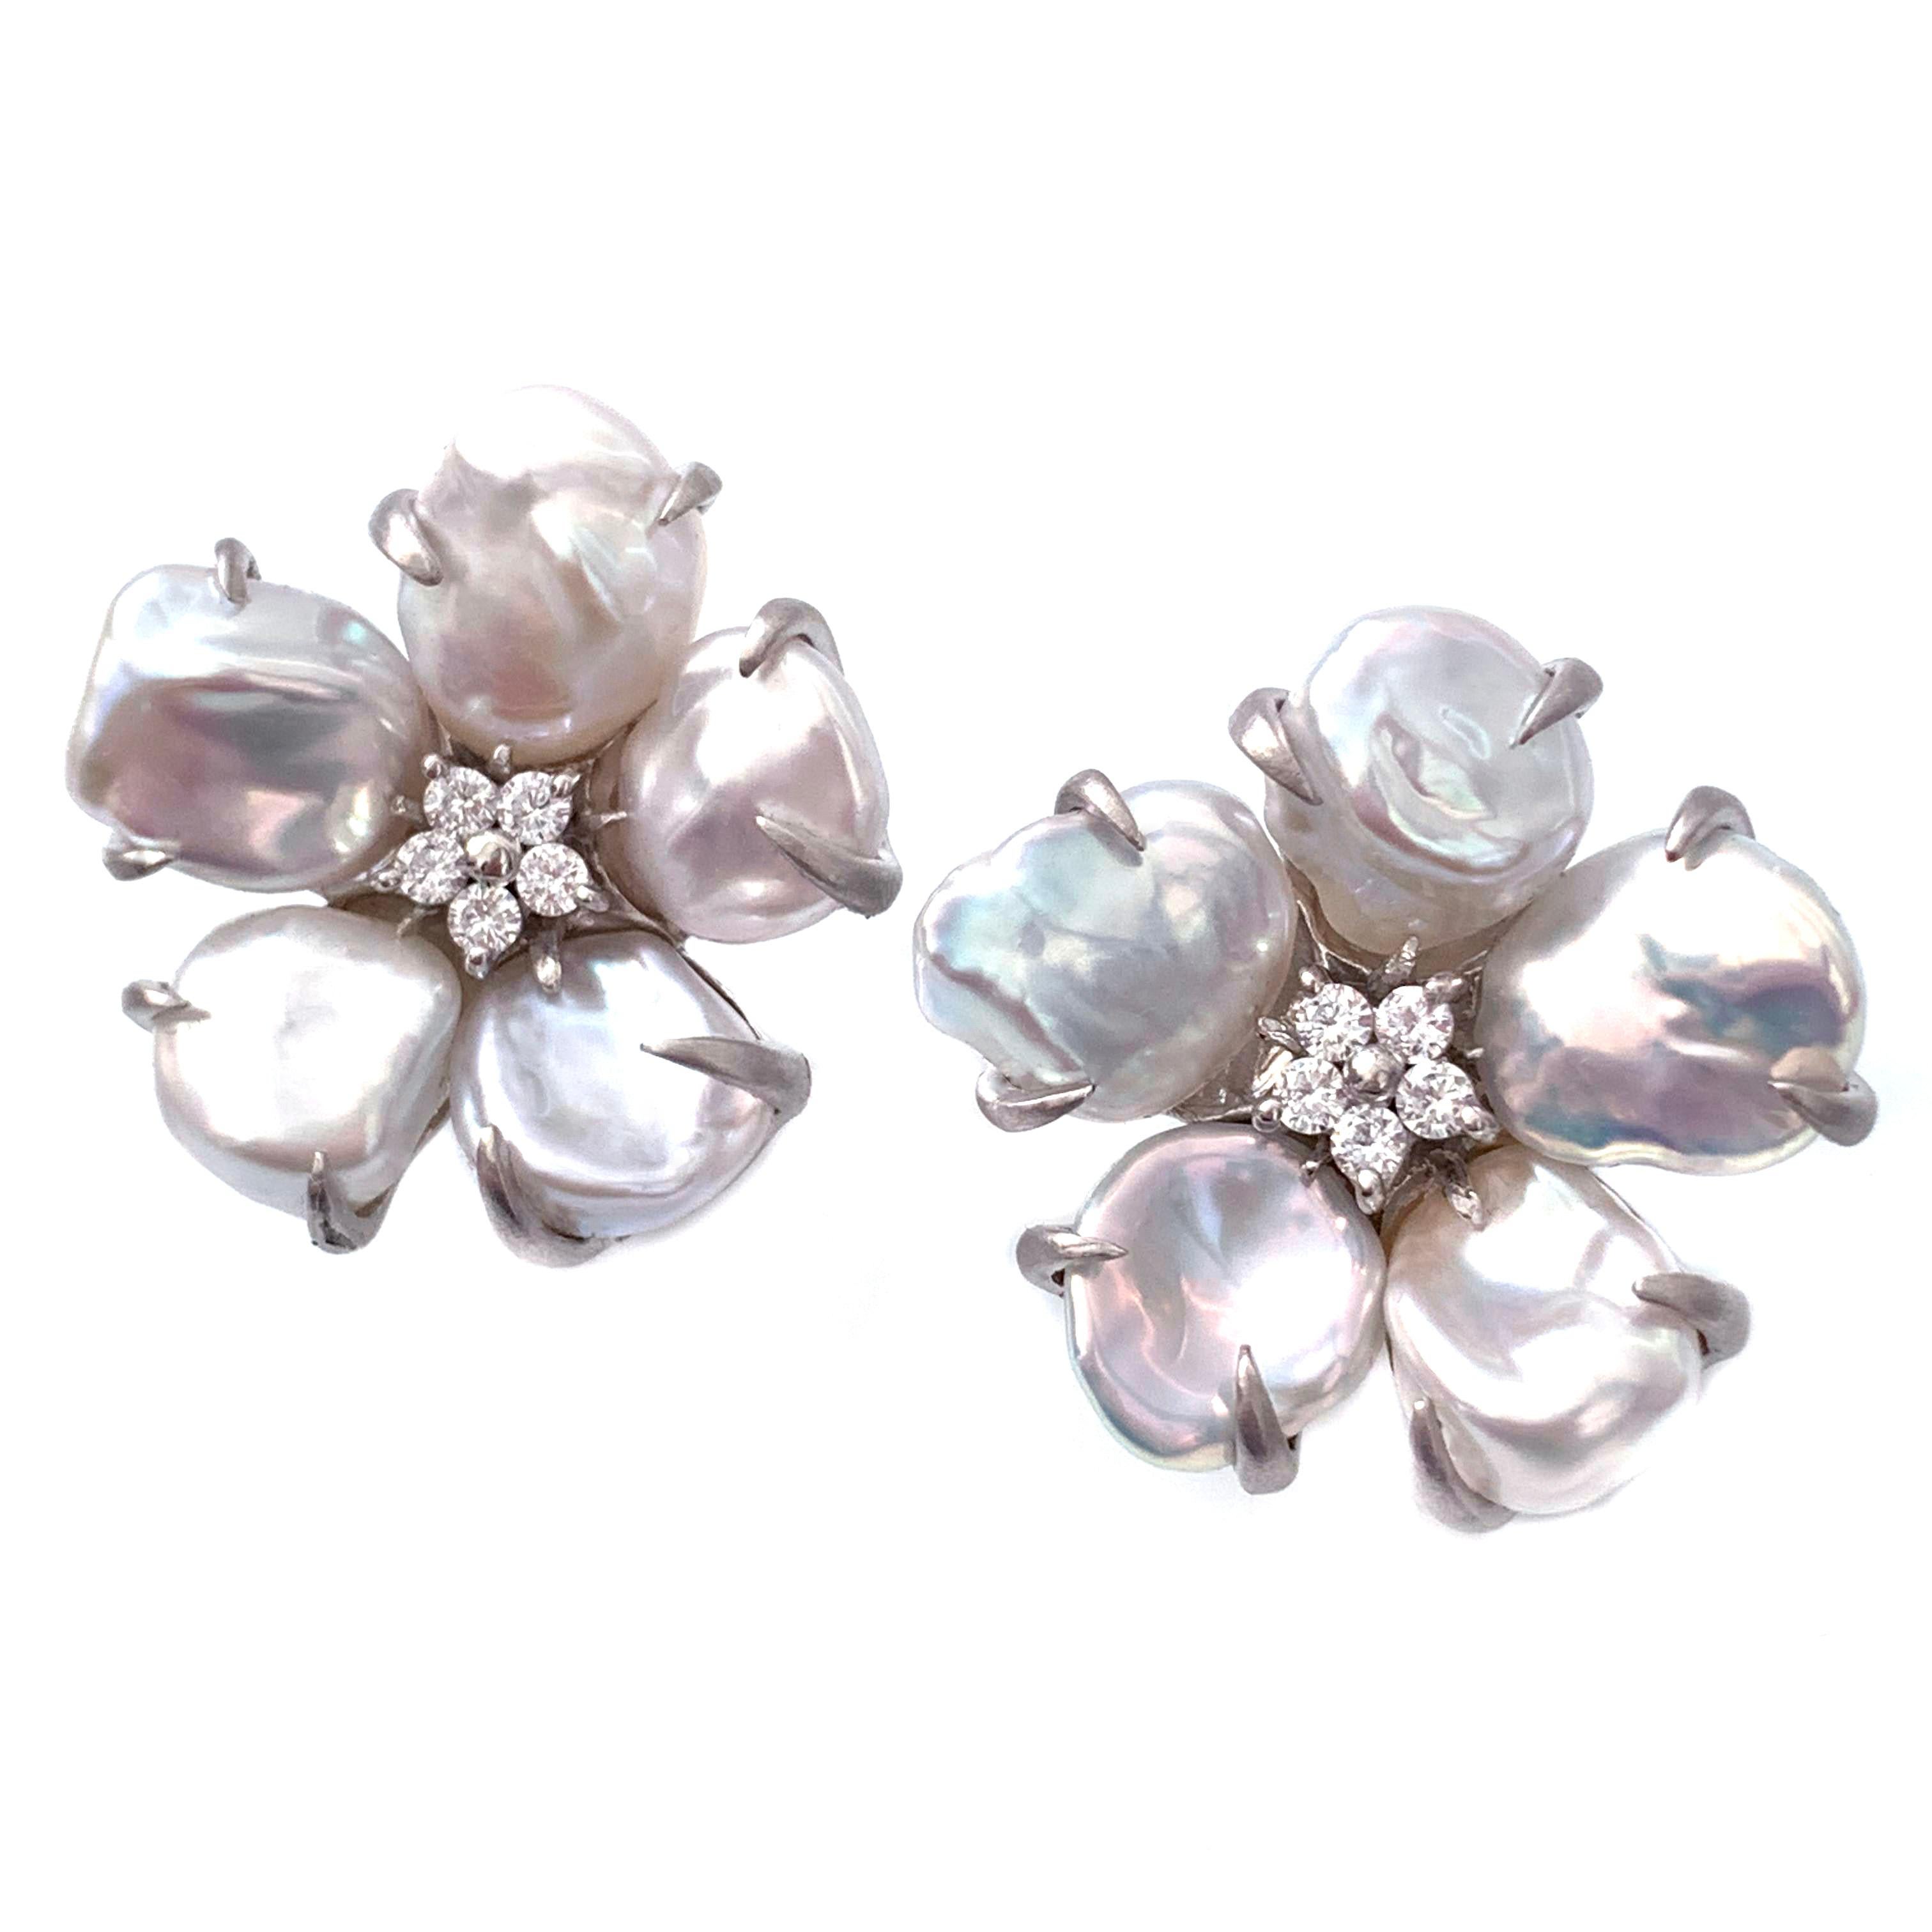 5-petal Baroque Pearl Sterling Silver Flower Earrings

These beautiful flower earrings features lustrous baroque pearls as petal and round faux diamond center, handset in platinum rhodium plated sterling silver, and brush satin finish.  Very